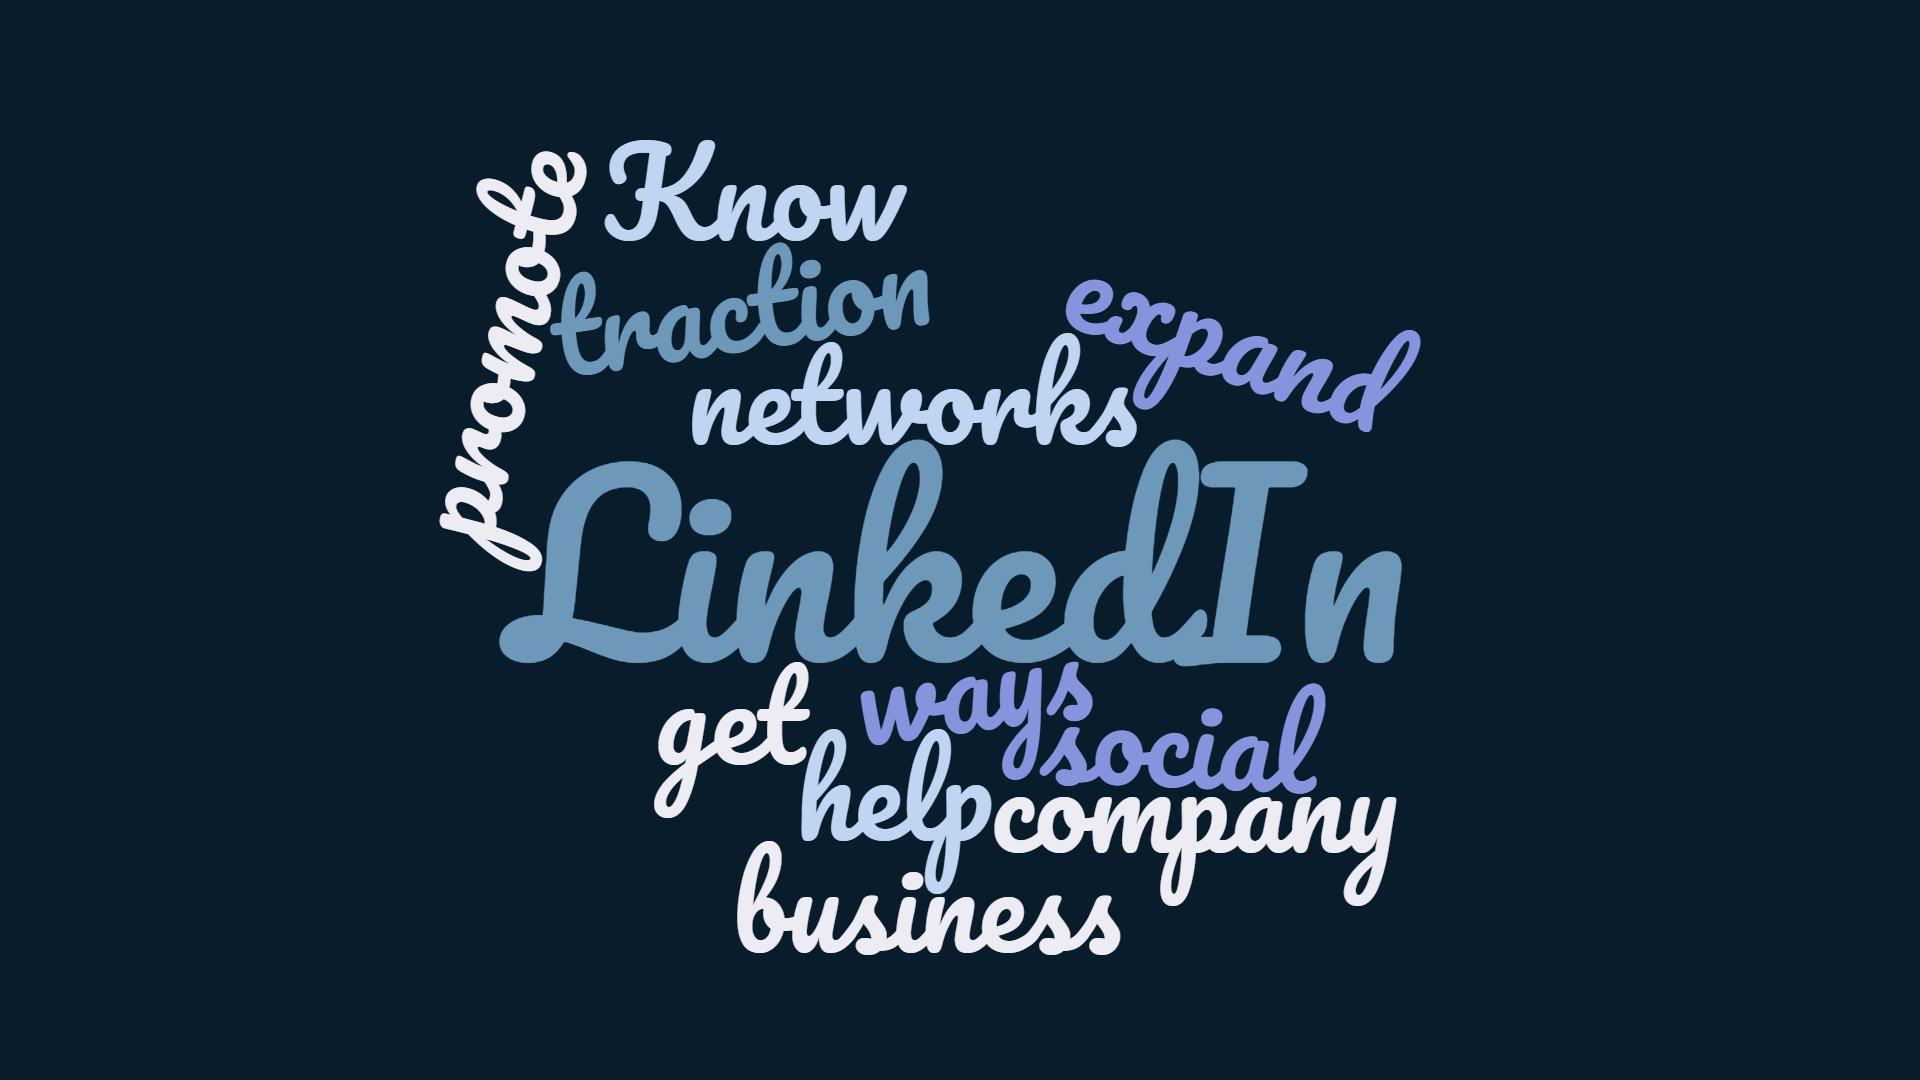 How to Promote Your Business on LinkedIn